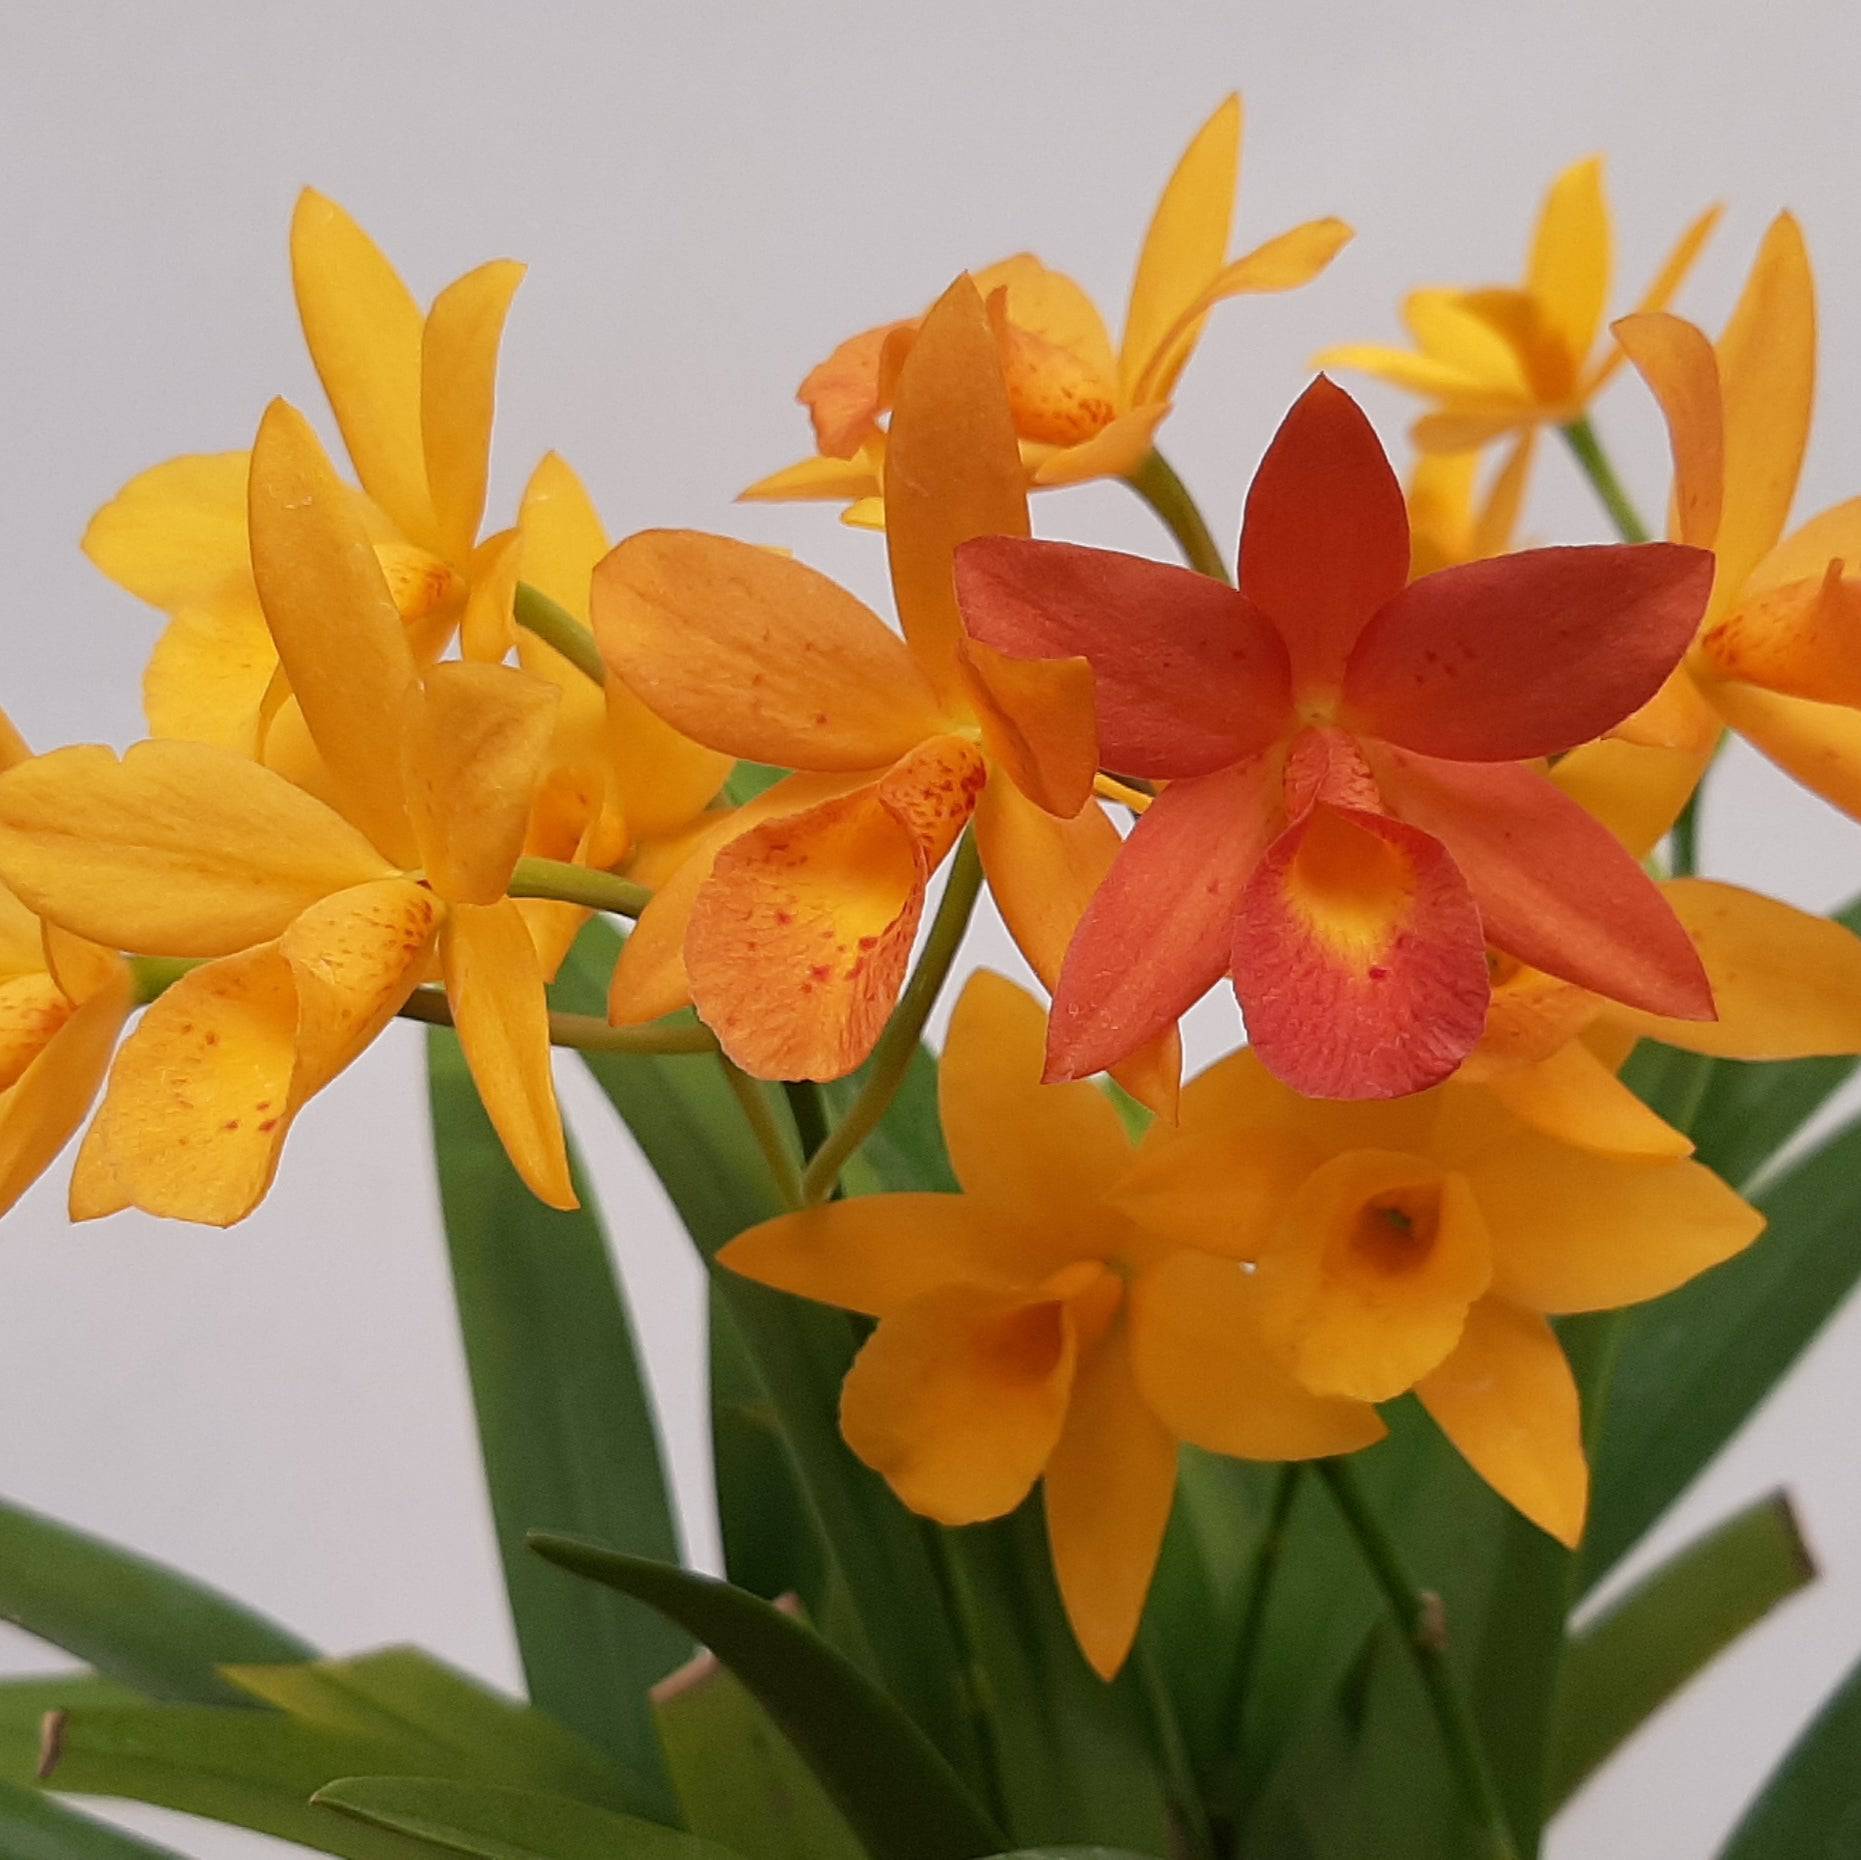 Cattleya Hidden Gold 'Lemon Stardust' - Without Flowers | BS - Buy Orchids Plants Online by Orchid-Tree.com